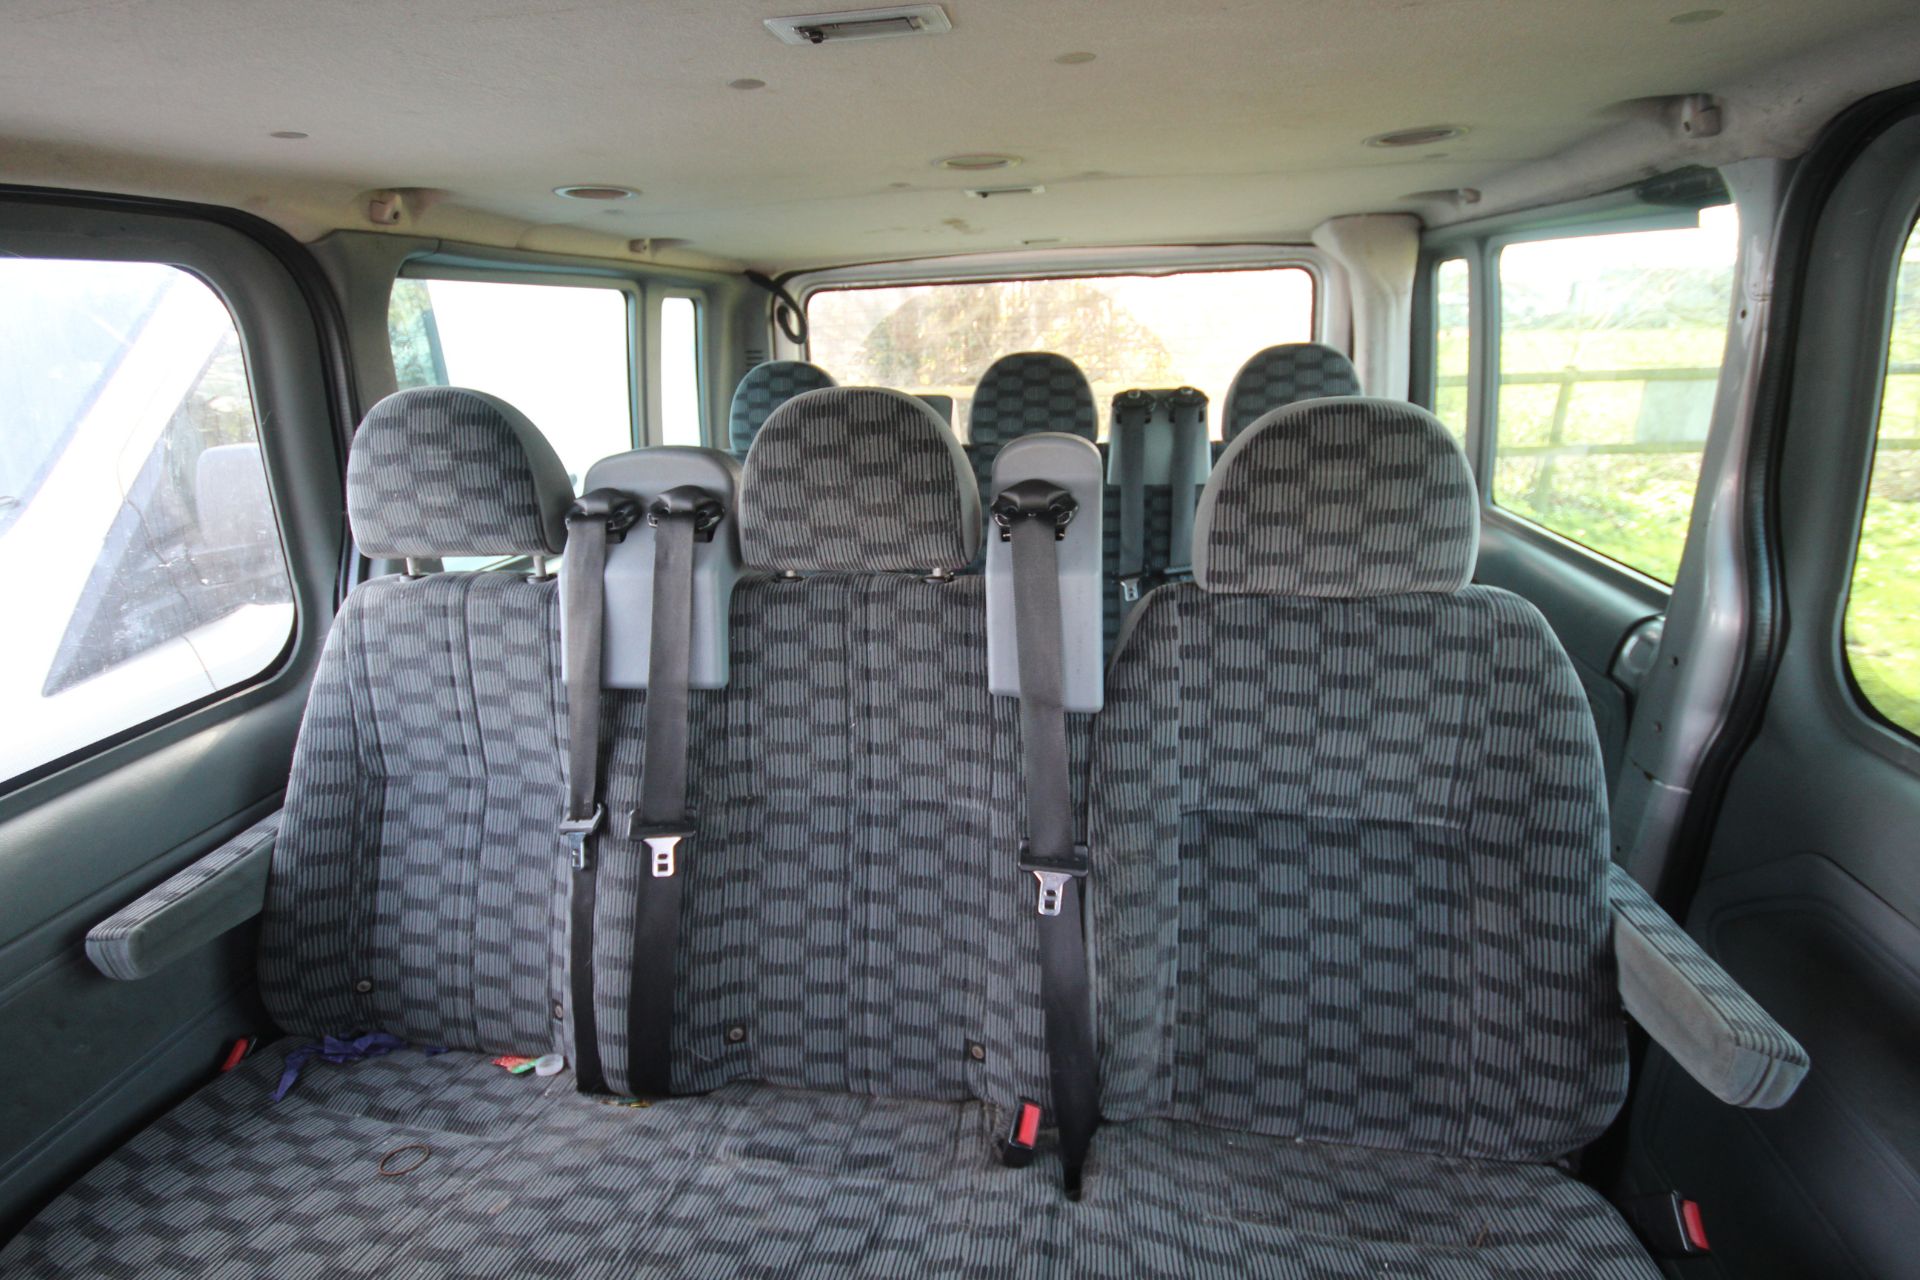 Ford Transit Tourneo 8 seater minibus. Registration GJ08 FAU. Date of first registration 18/03/2008. - Image 47 of 54